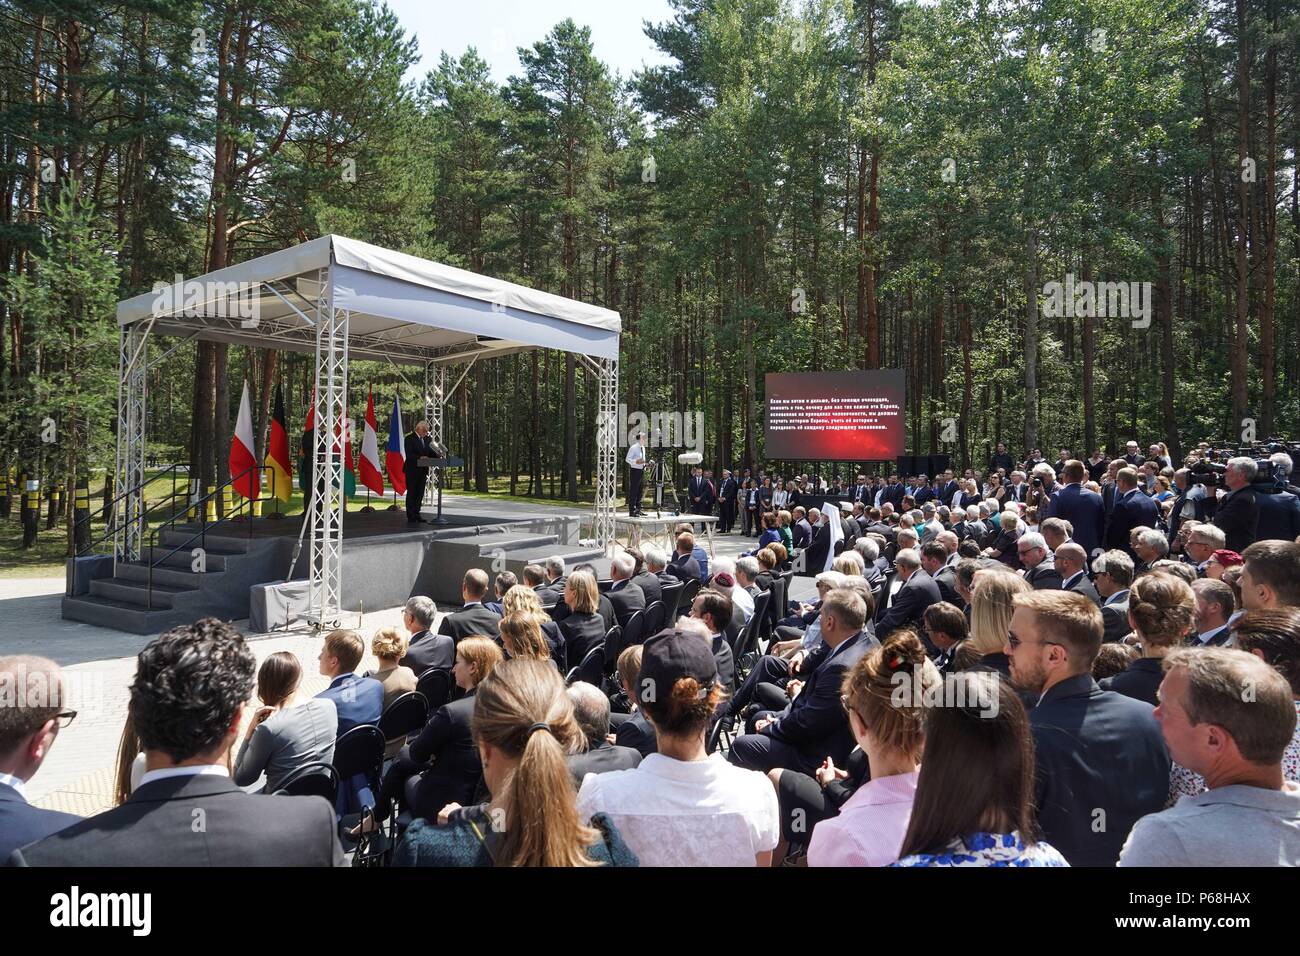 Minsk, Germany. 29th June, 2018. German President Frank-Walter Steinmeier of the Social Democratic Party (SPD) speaking during the inauguration of the memorial site Malyj Trostenez. Malyj Trostenez was the largest National Socialist extermination camp between 1941 and 1944 on the grounds of the former Sovier Union. However, like many other areas on the former Soviet Union, it is not well-known in Germany and Europe. Credit: Jörg Carstensen/dpa/Alamy Live News Stock Photo